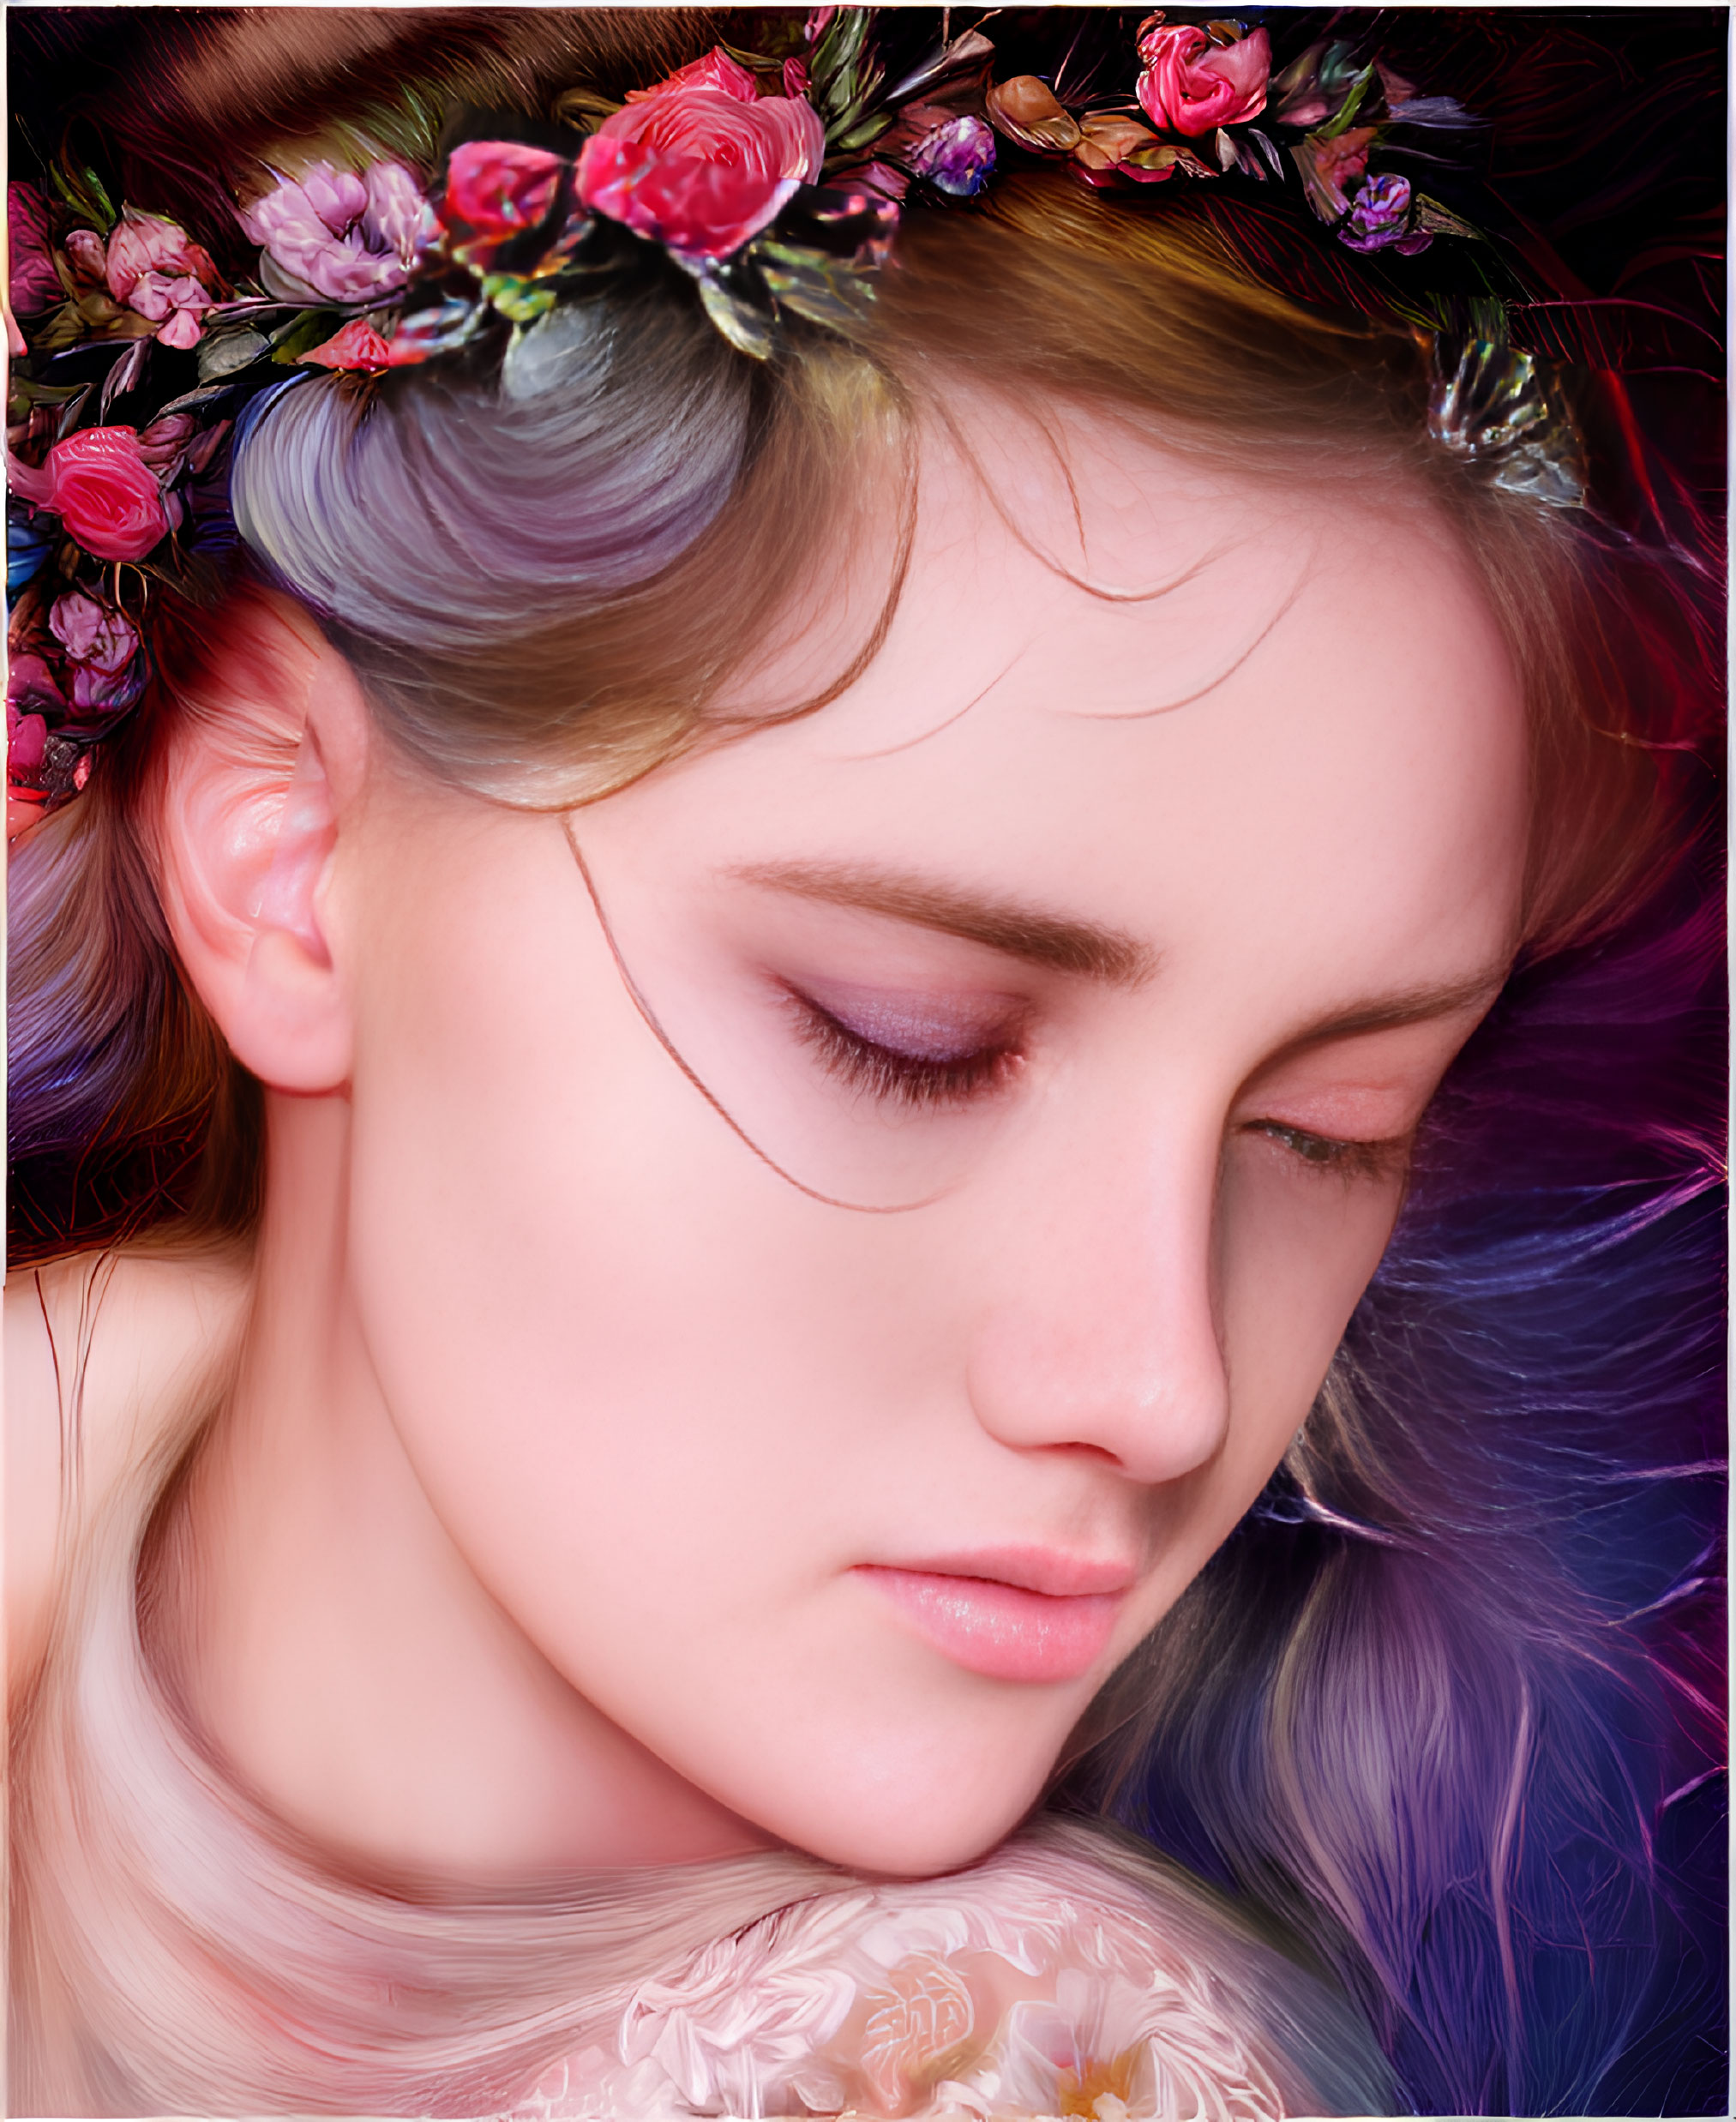 Detailed digital artwork: Woman with floral crown, vibrant colors, peaceful expression